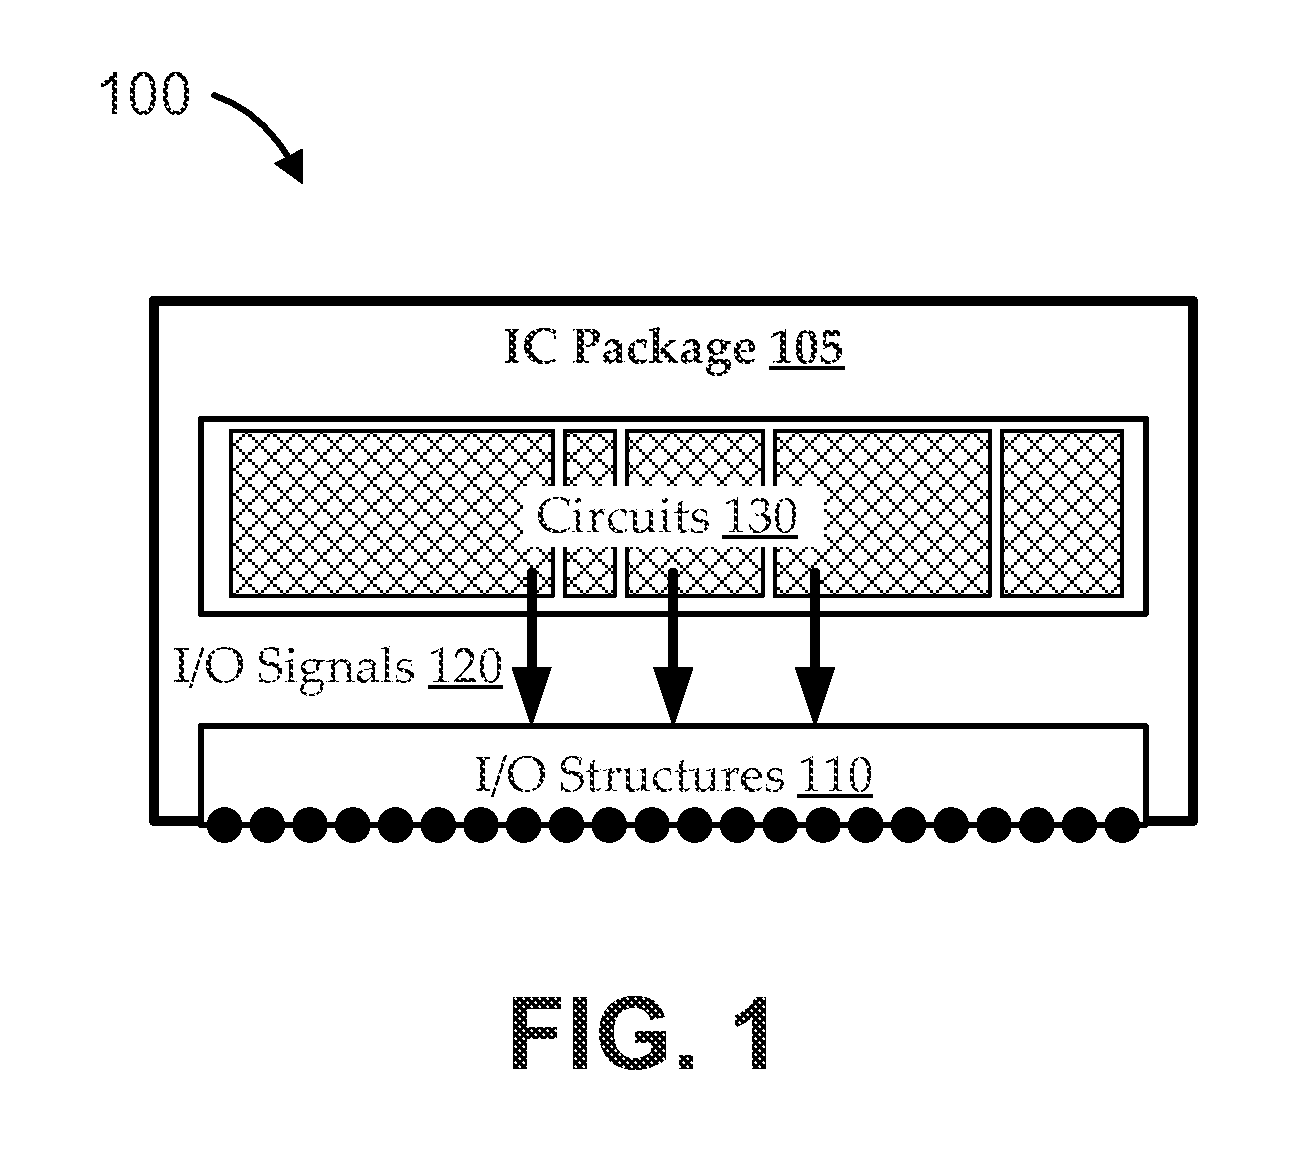 Low-noise arrangement for very-large-scale integration differential input/output structures